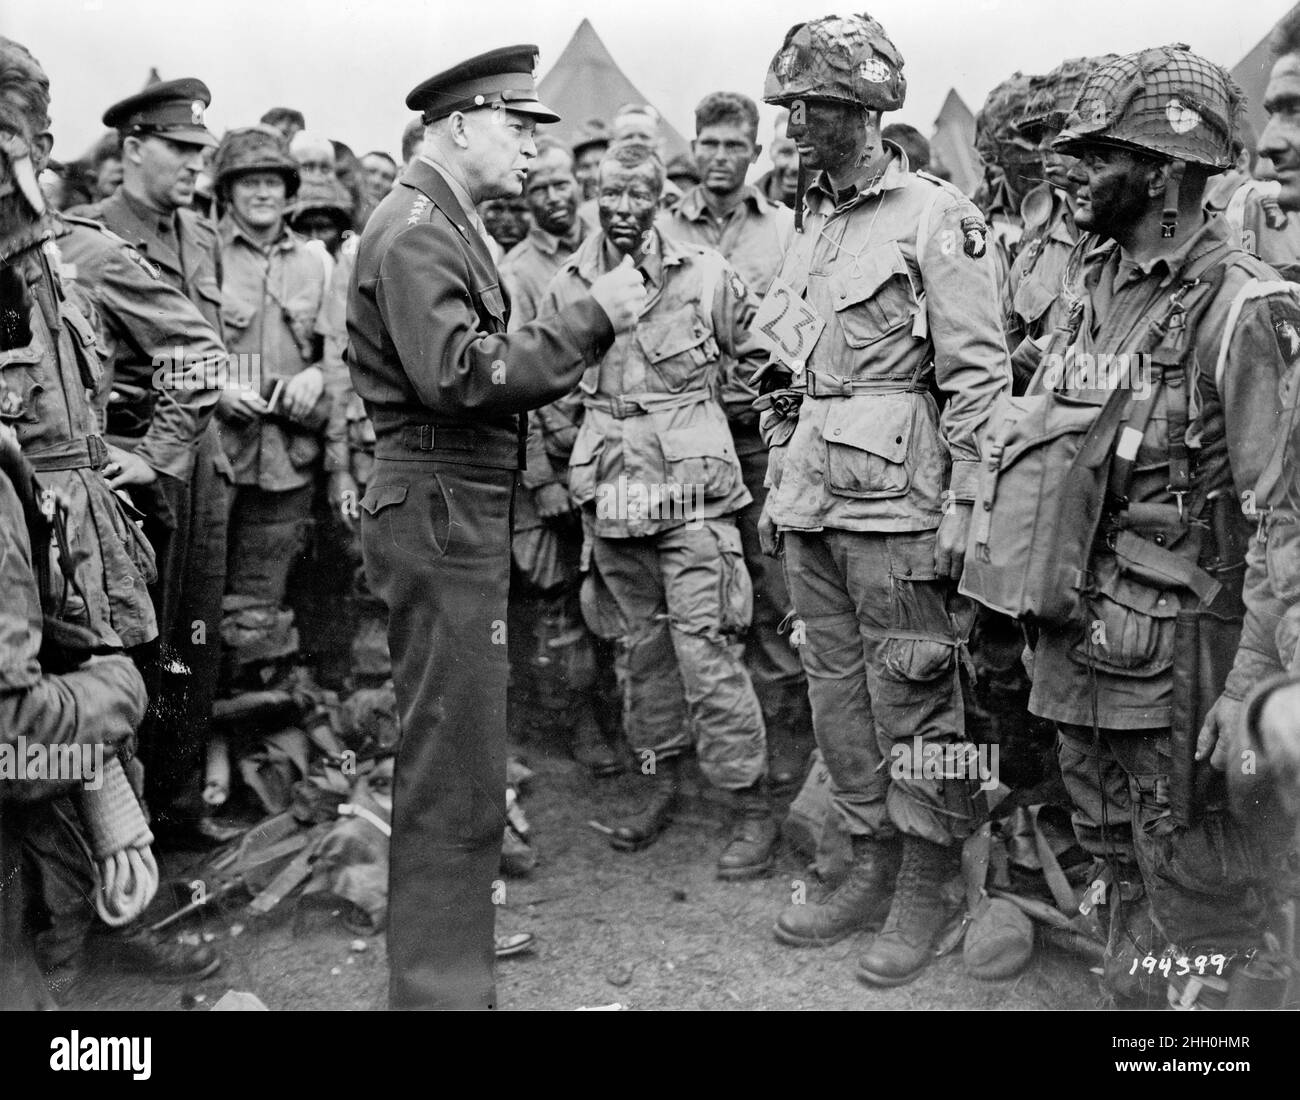 Gen. Dwight D. Eisenhower gives the order of the Day. 'Full victory-nothing less' to paratroopers in England, just before they board their airplanes to participate in the first assault in the invasion of the continent of Europe.' Eisenhower is meeting with US Co. E, 502nd Parachute Infantry Regiment (Strike) of the 101st Airborne Division, photo taken at Greenham Common Airfield in England about 8:30 p.m. on June 5, 1944. The General was talking about fly fishing with his men as he always did before a stressful operation Stock Photo